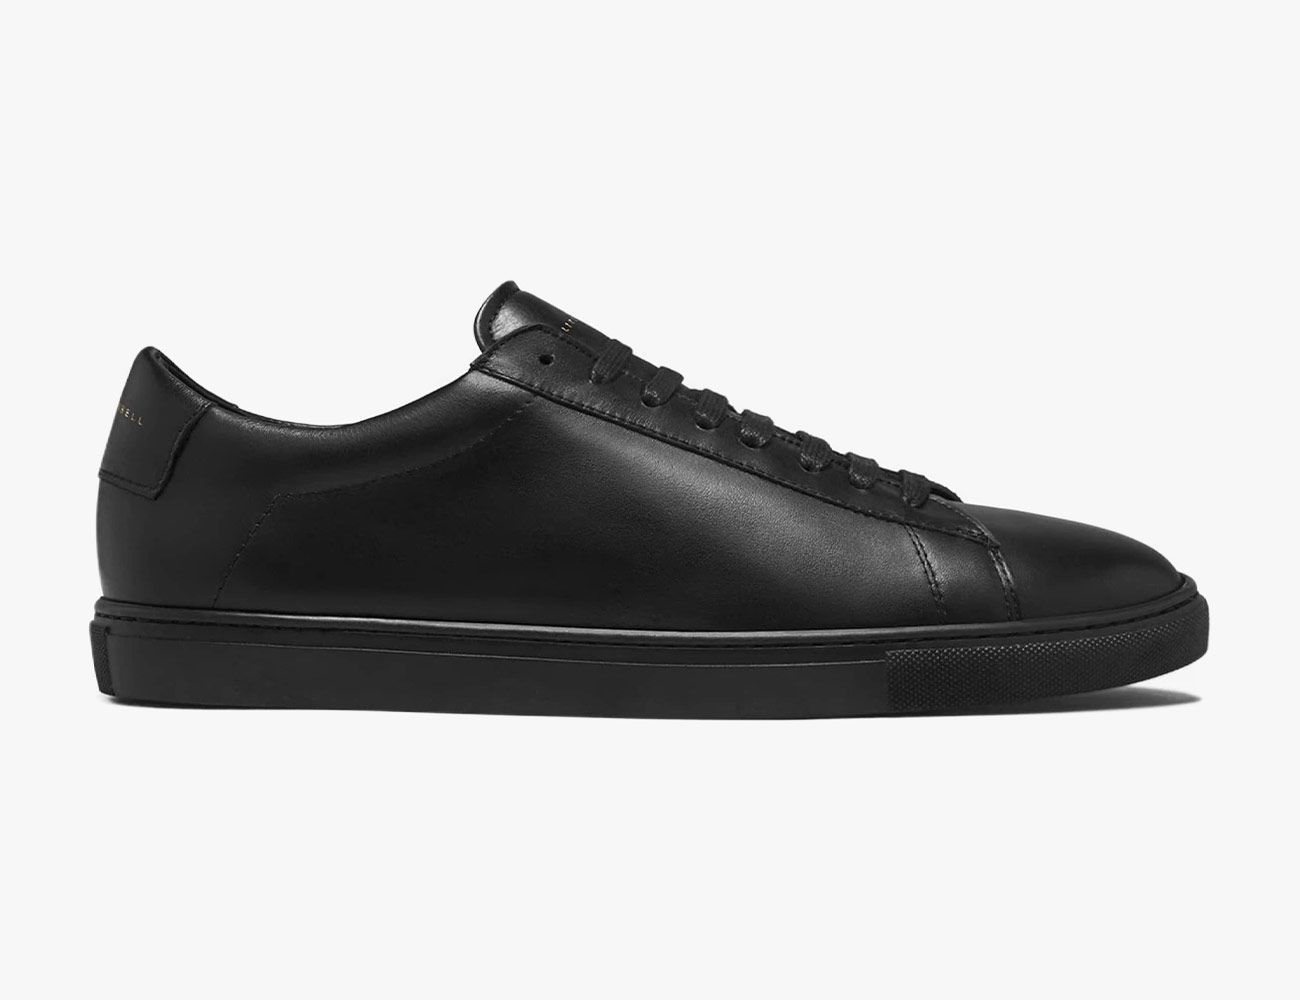 The Best Black Sneakers You Can Buy